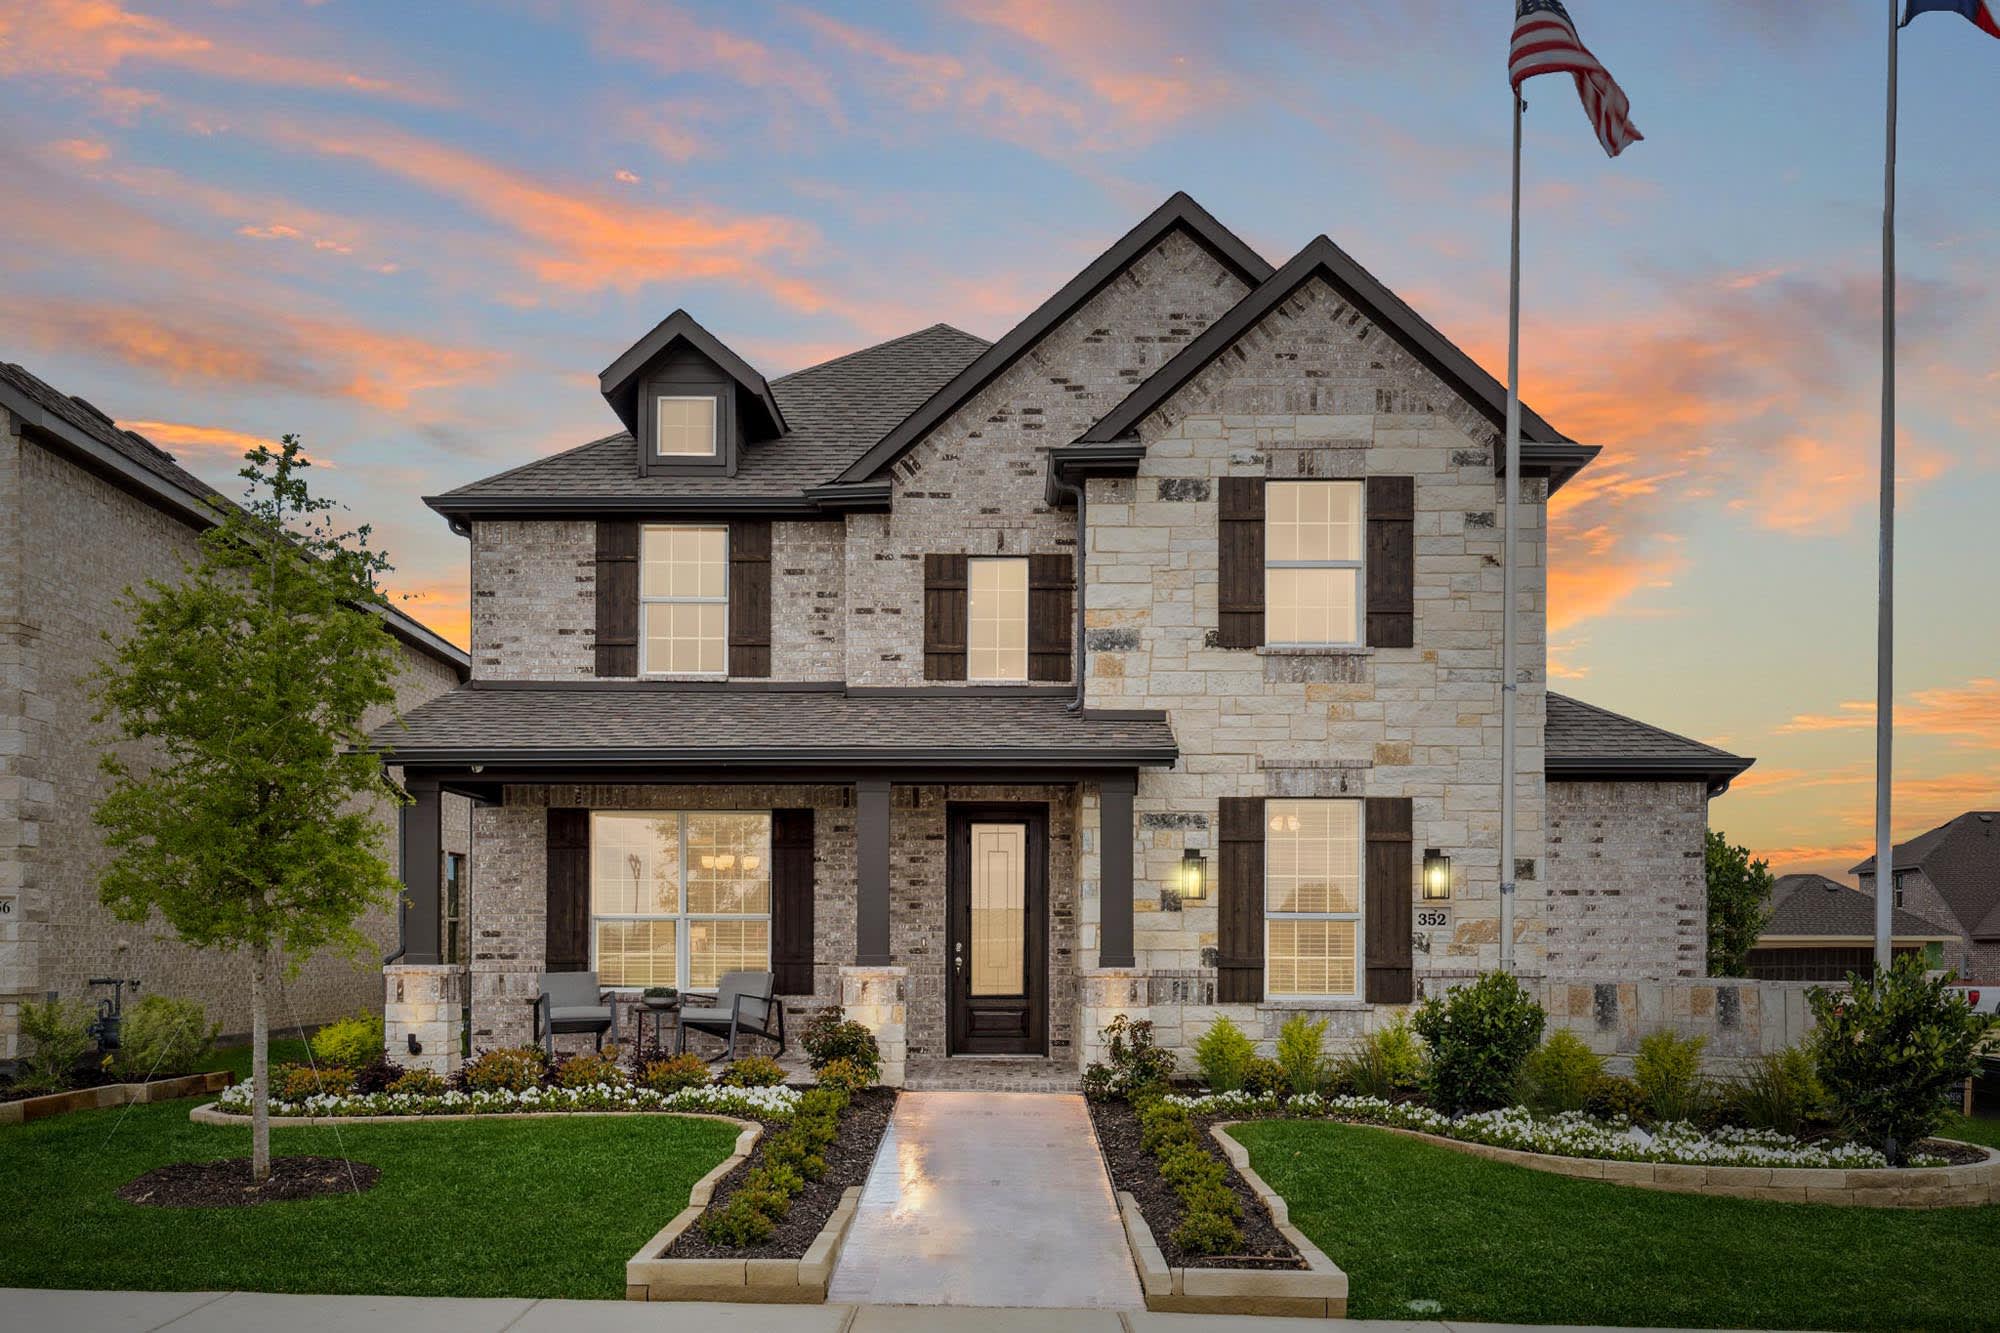 Elevation C with Stone | Concept 3106 at Redden Farms - Classic Series in Midlothian, TX by Landsea Homes